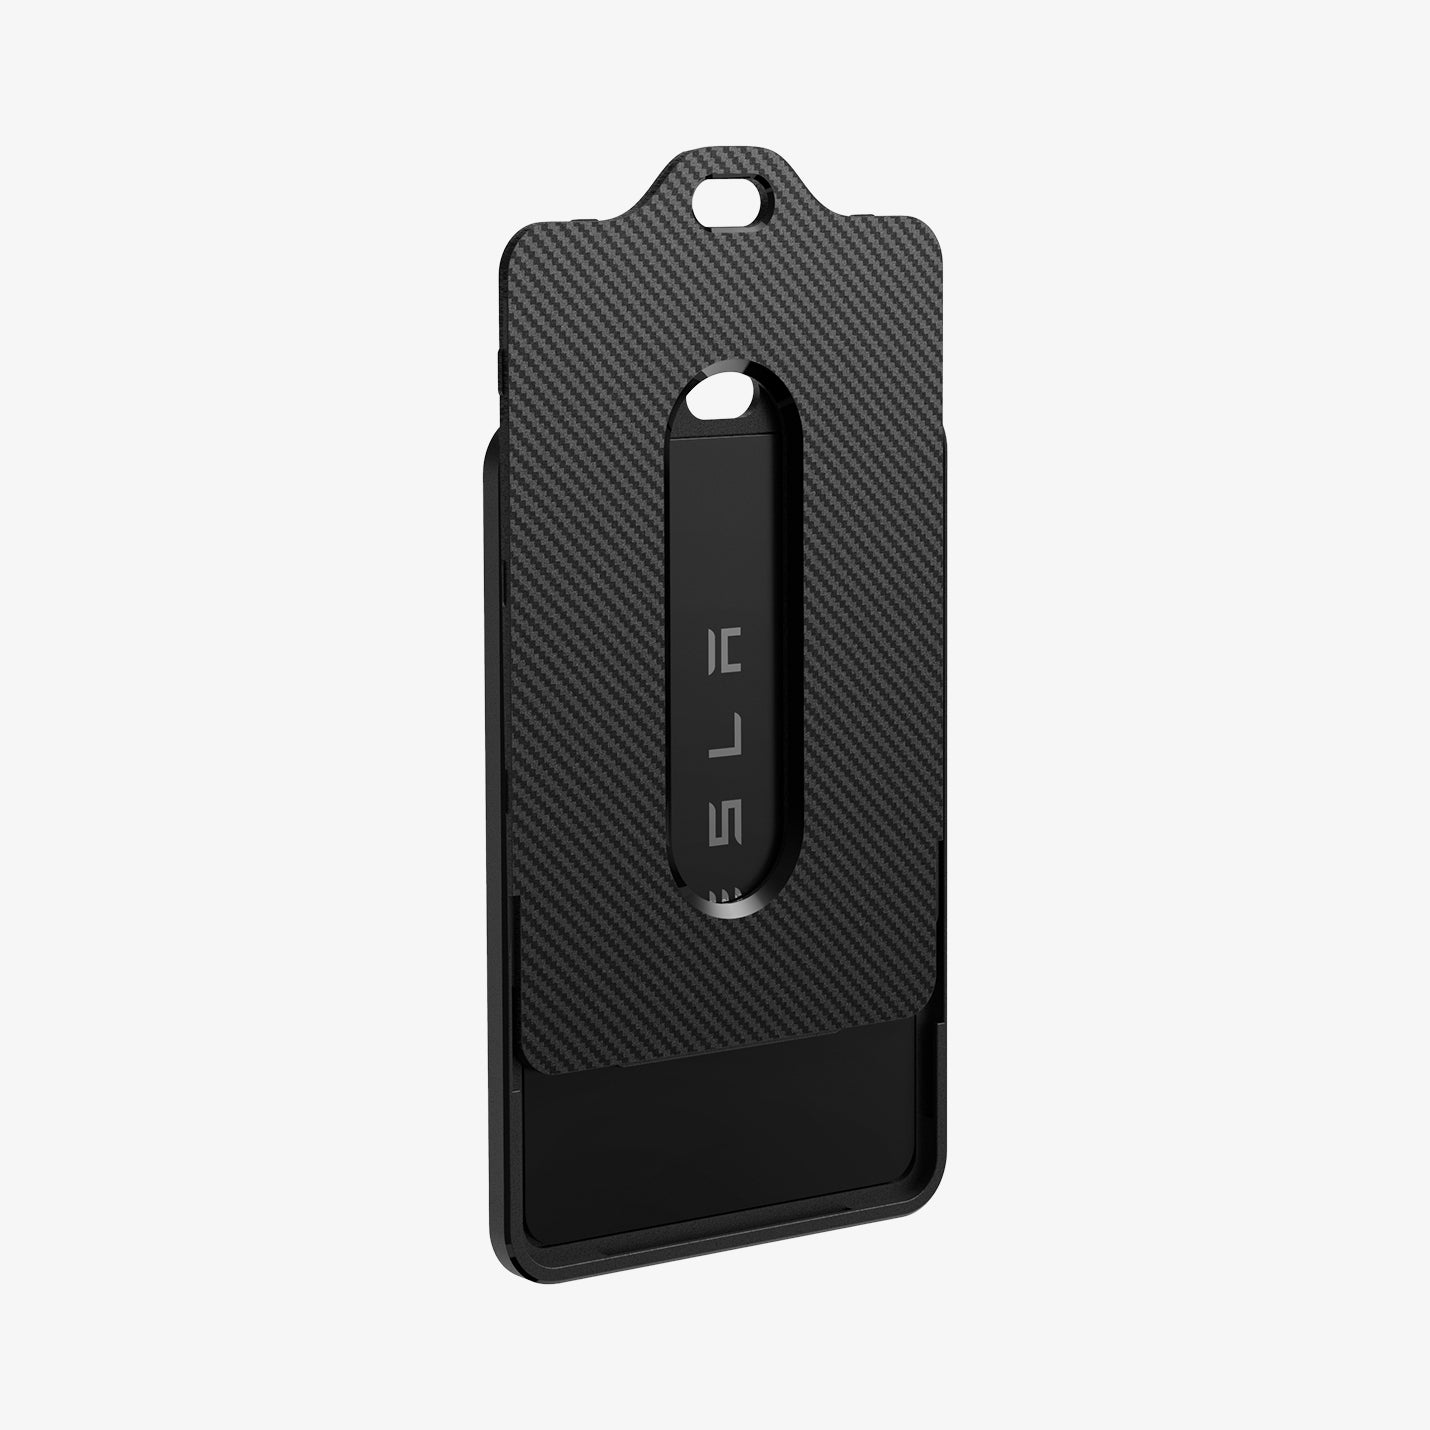 ACP07083 - Tesla AirFit Key Card Holder showing the back with key being placed into slot